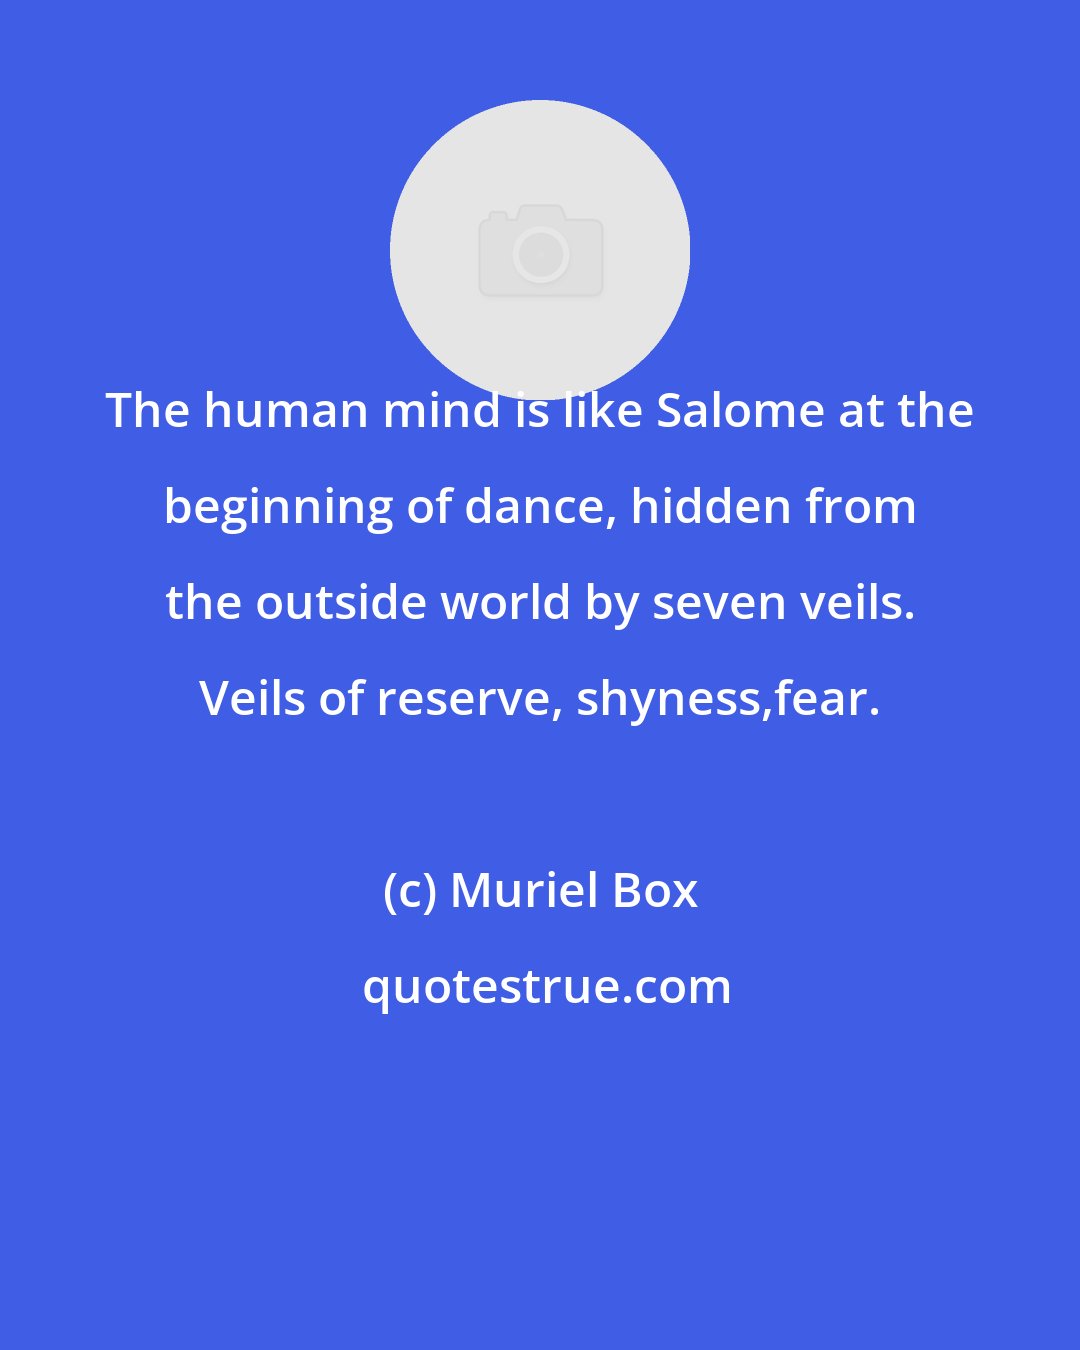 Muriel Box: The human mind is like Salome at the beginning of dance, hidden from the outside world by seven veils. Veils of reserve, shyness,fear.